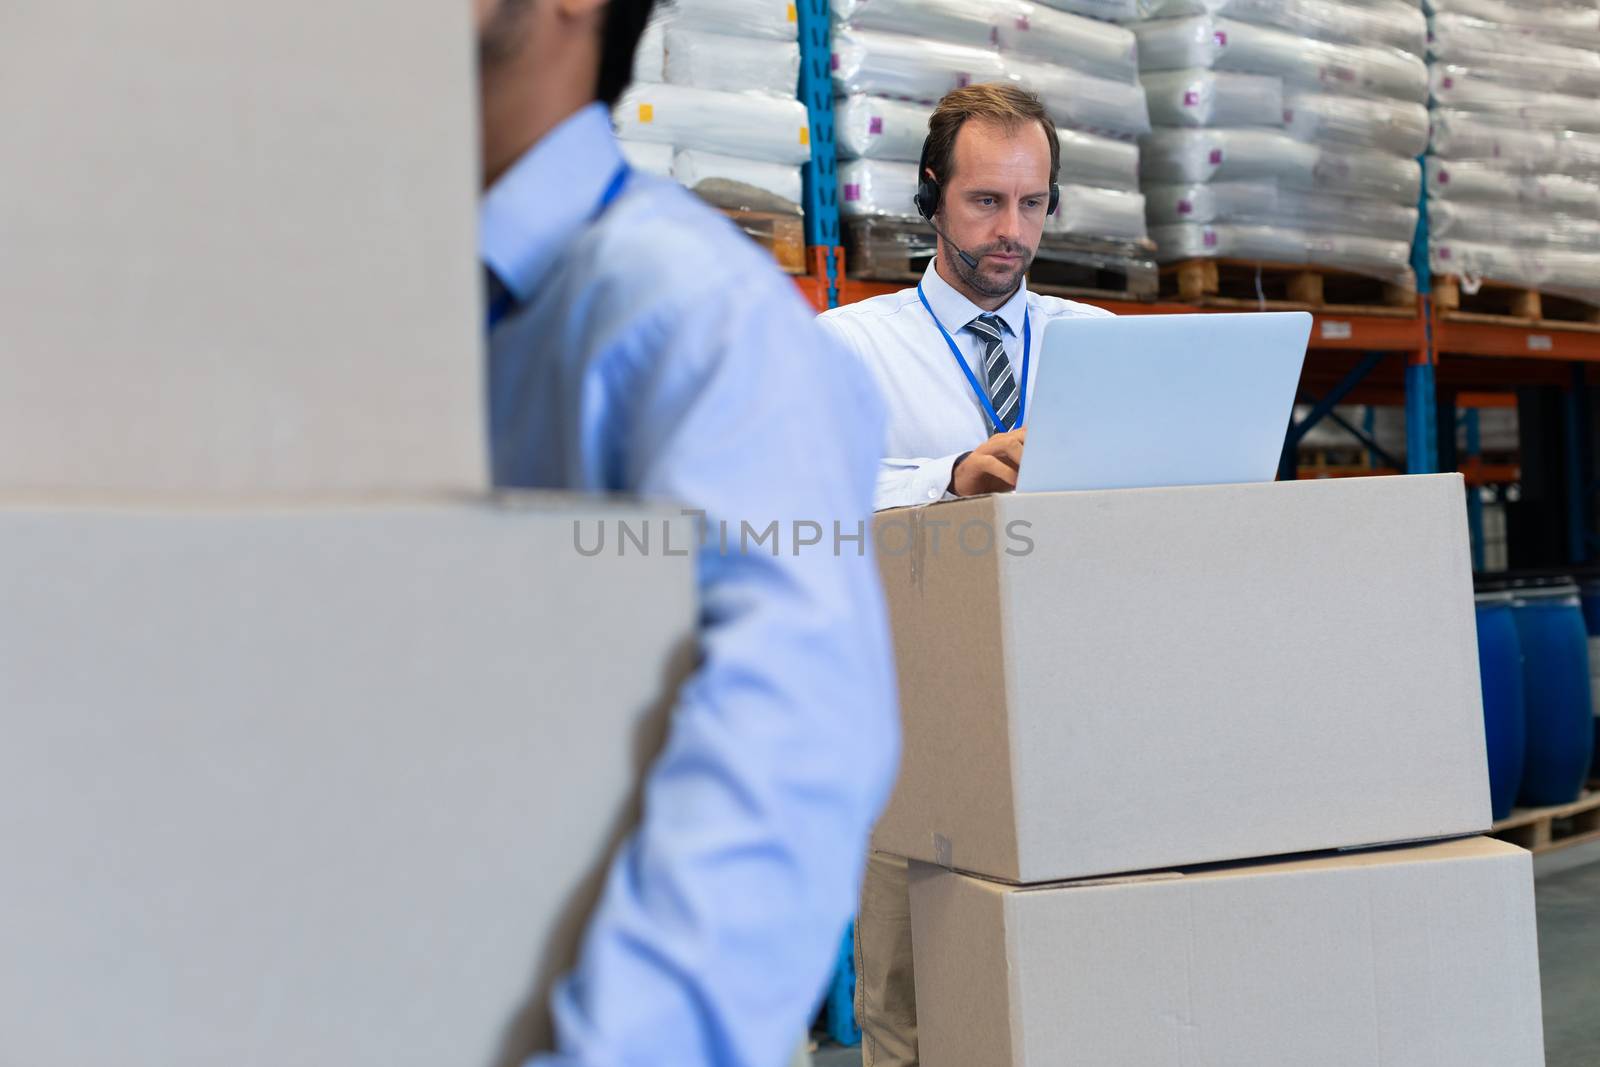 Male supervisor with headset working on laptop in warehouse by Wavebreakmedia